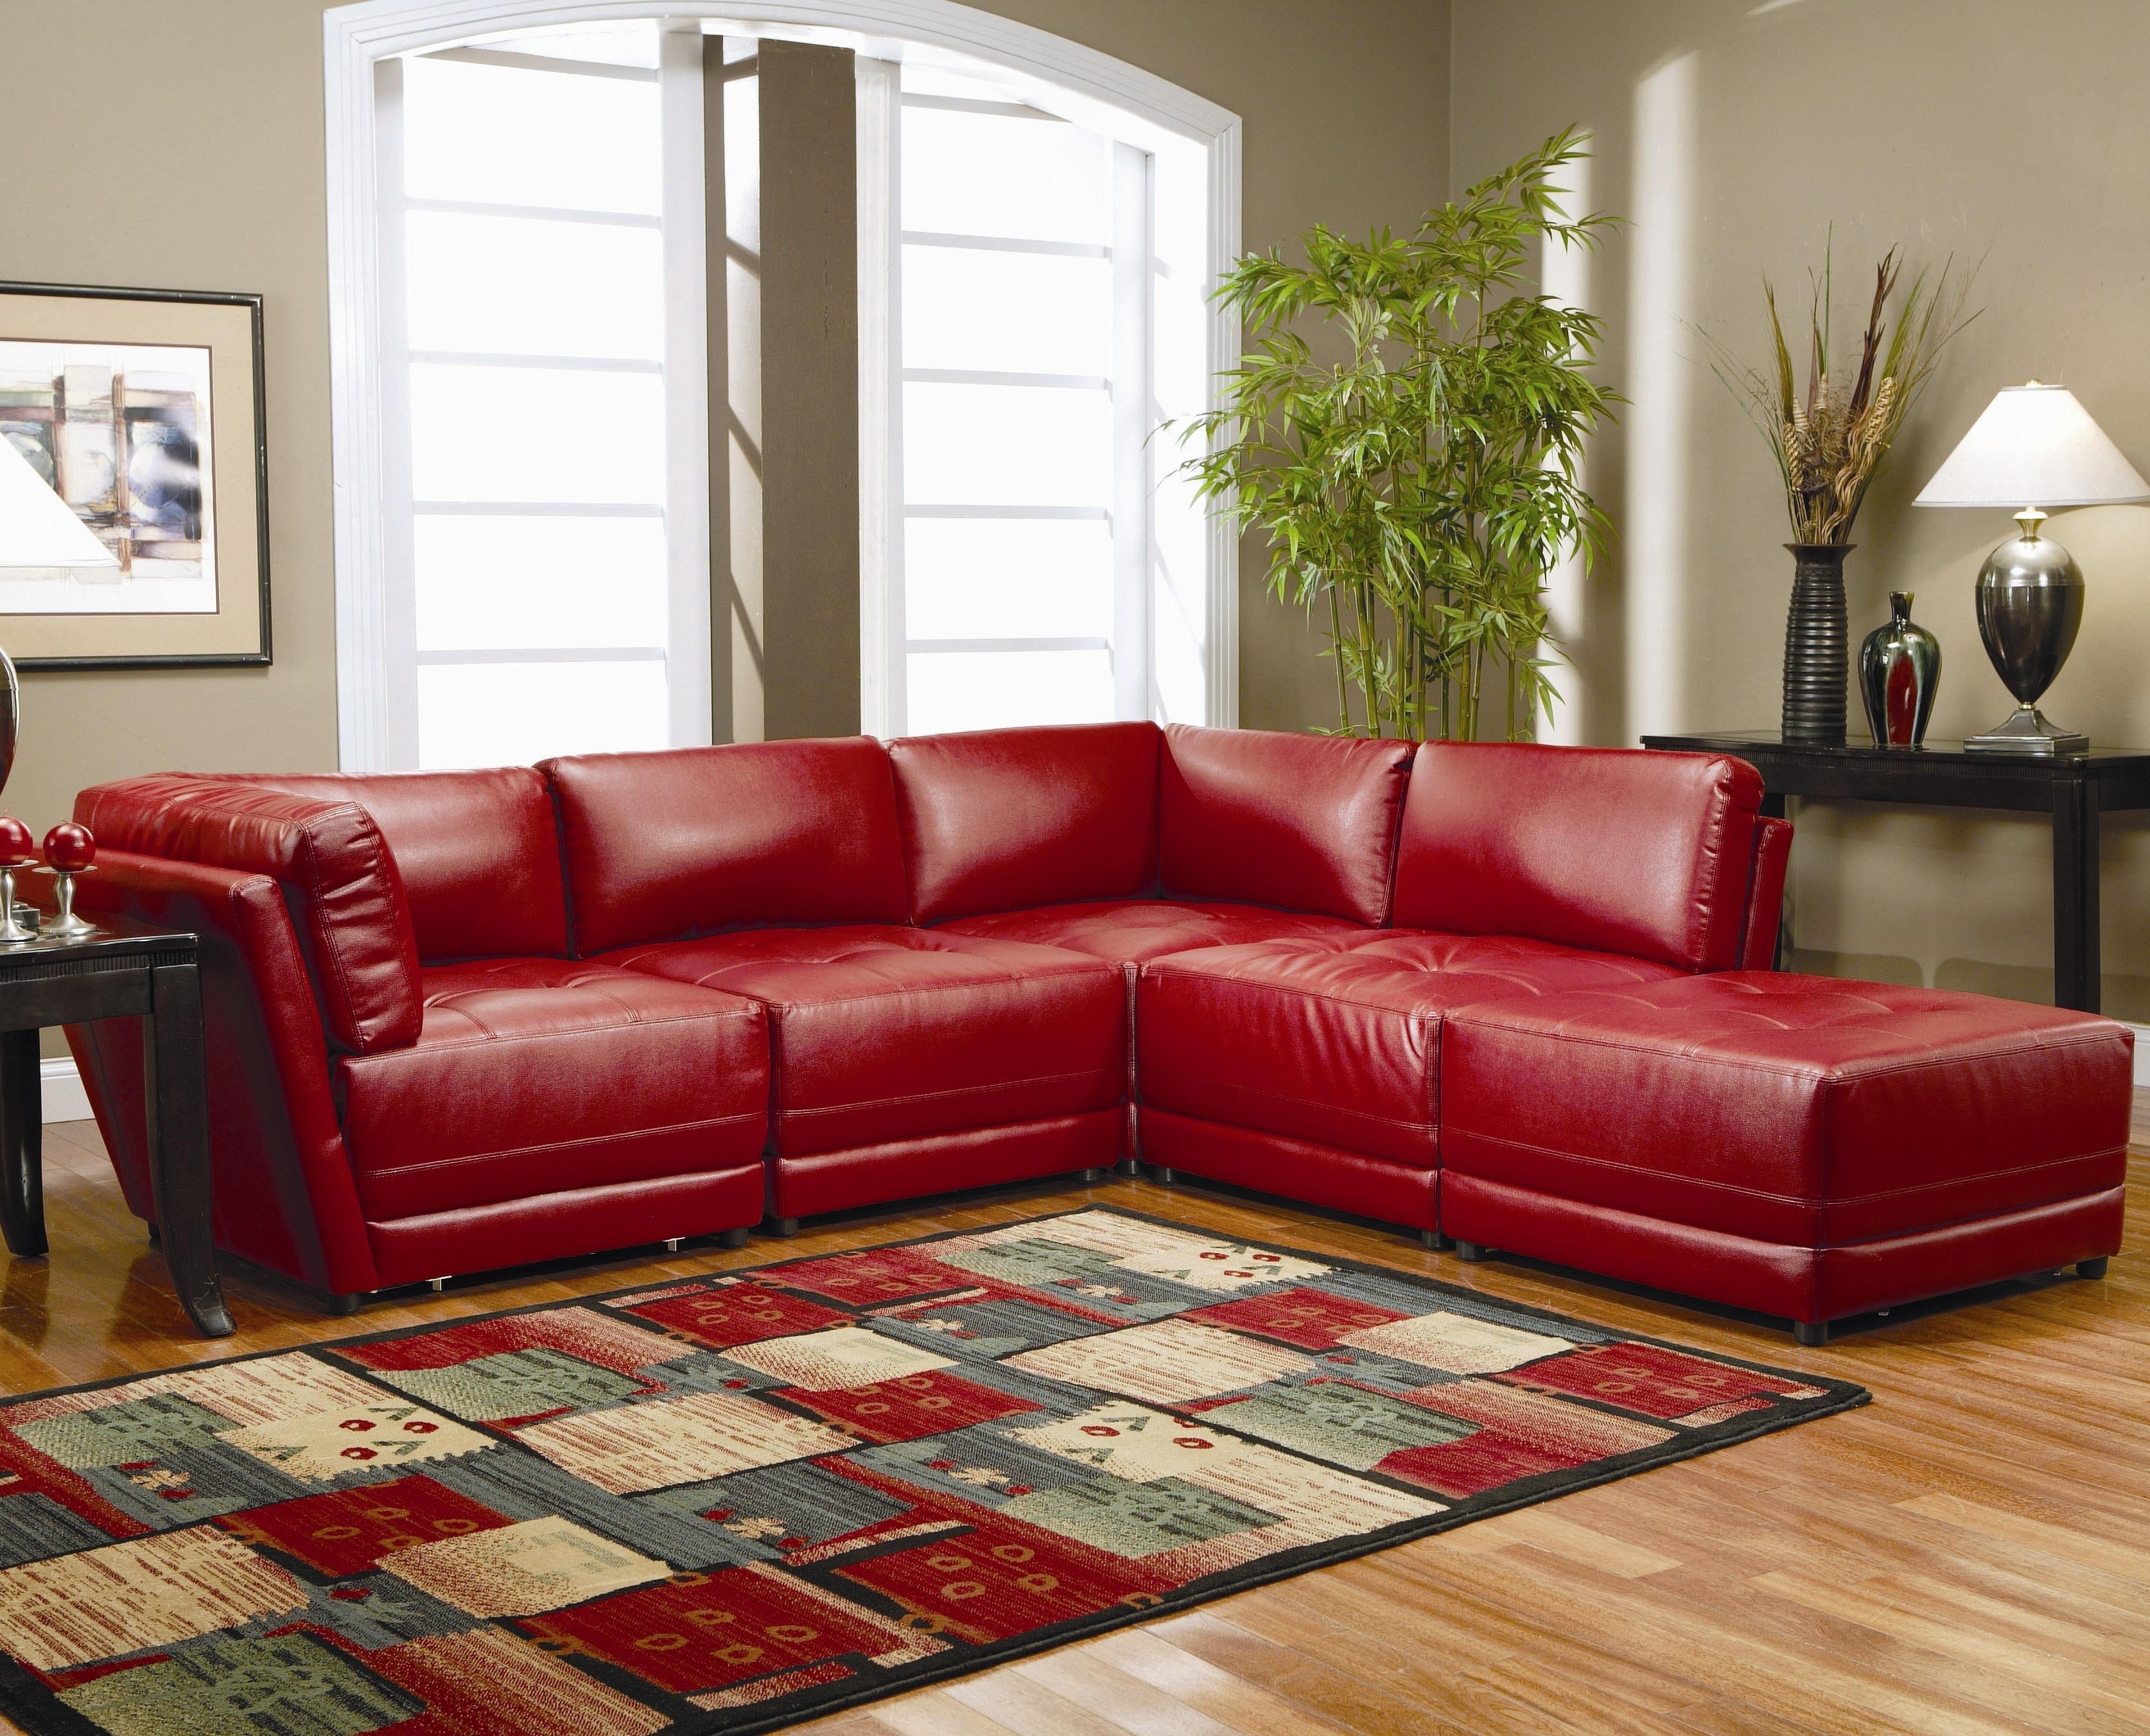 8 Pics Jeromes Sectional Sofas And View Alqu Blog